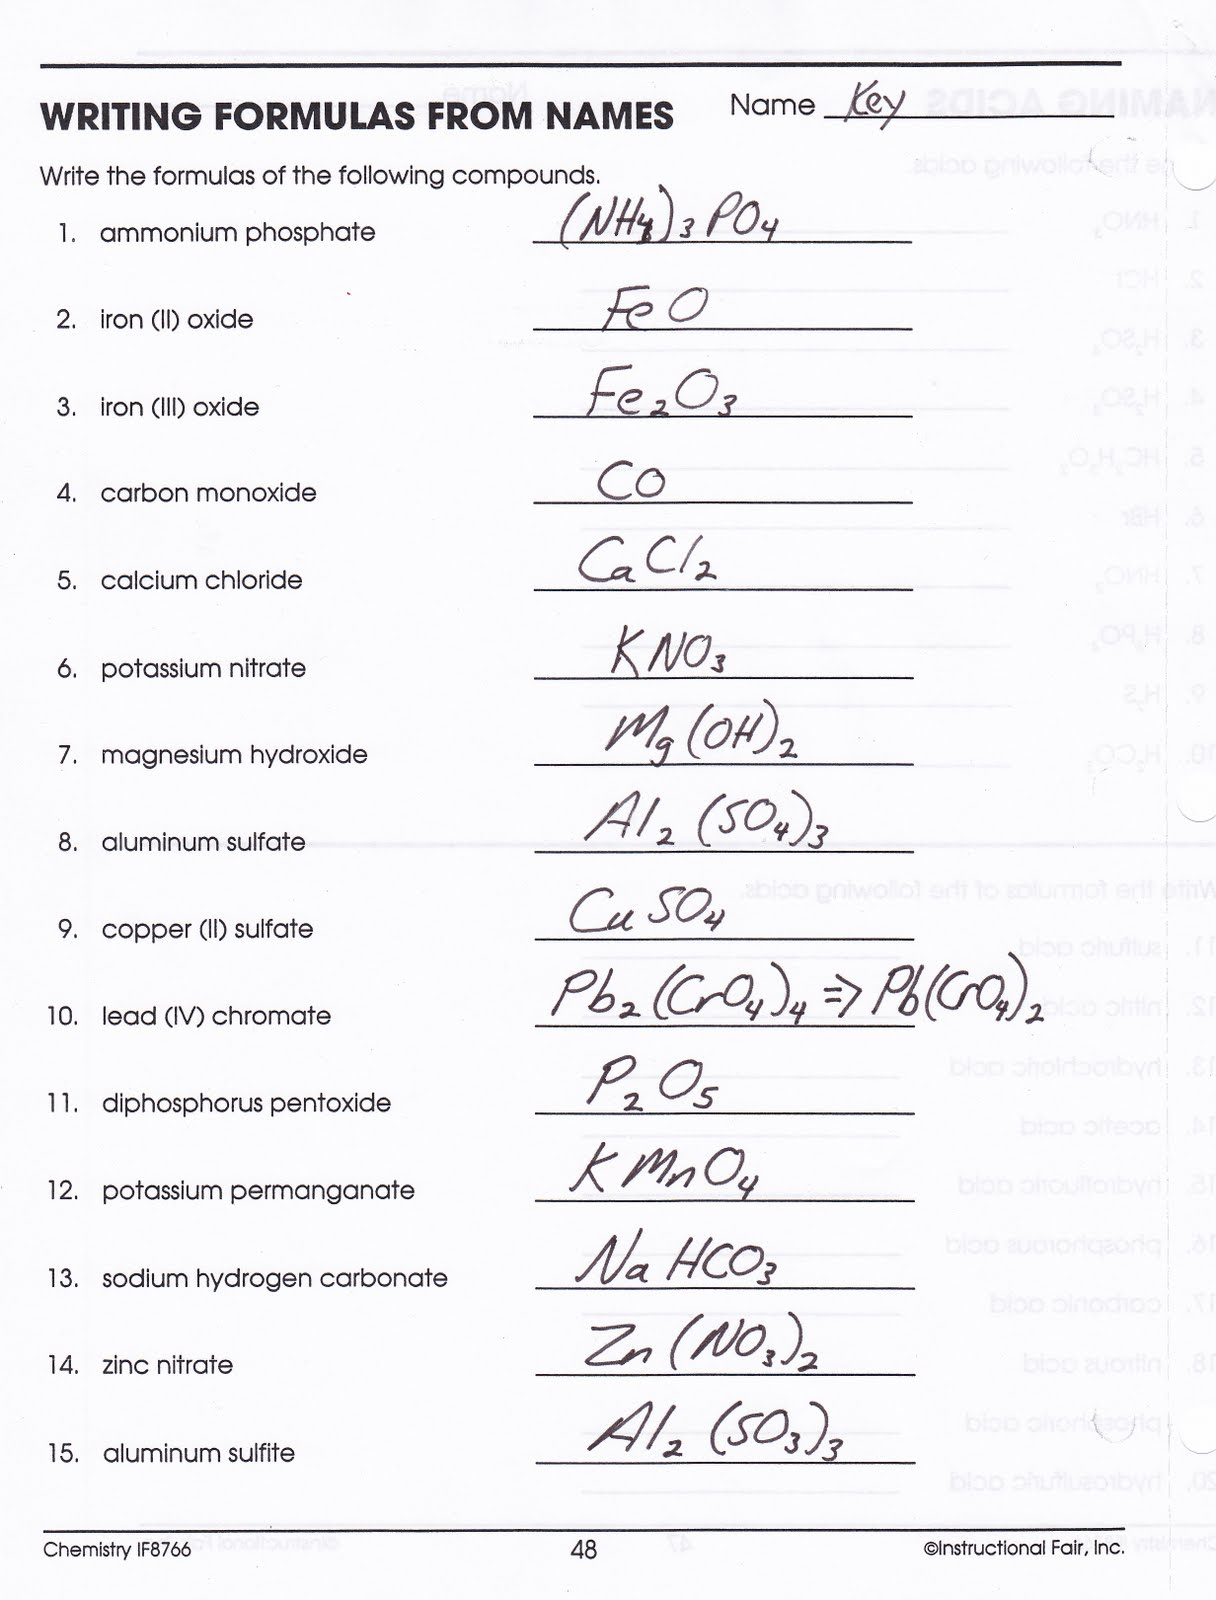 Heritage High School Chemistry 2010 11 Writing Compound Names And